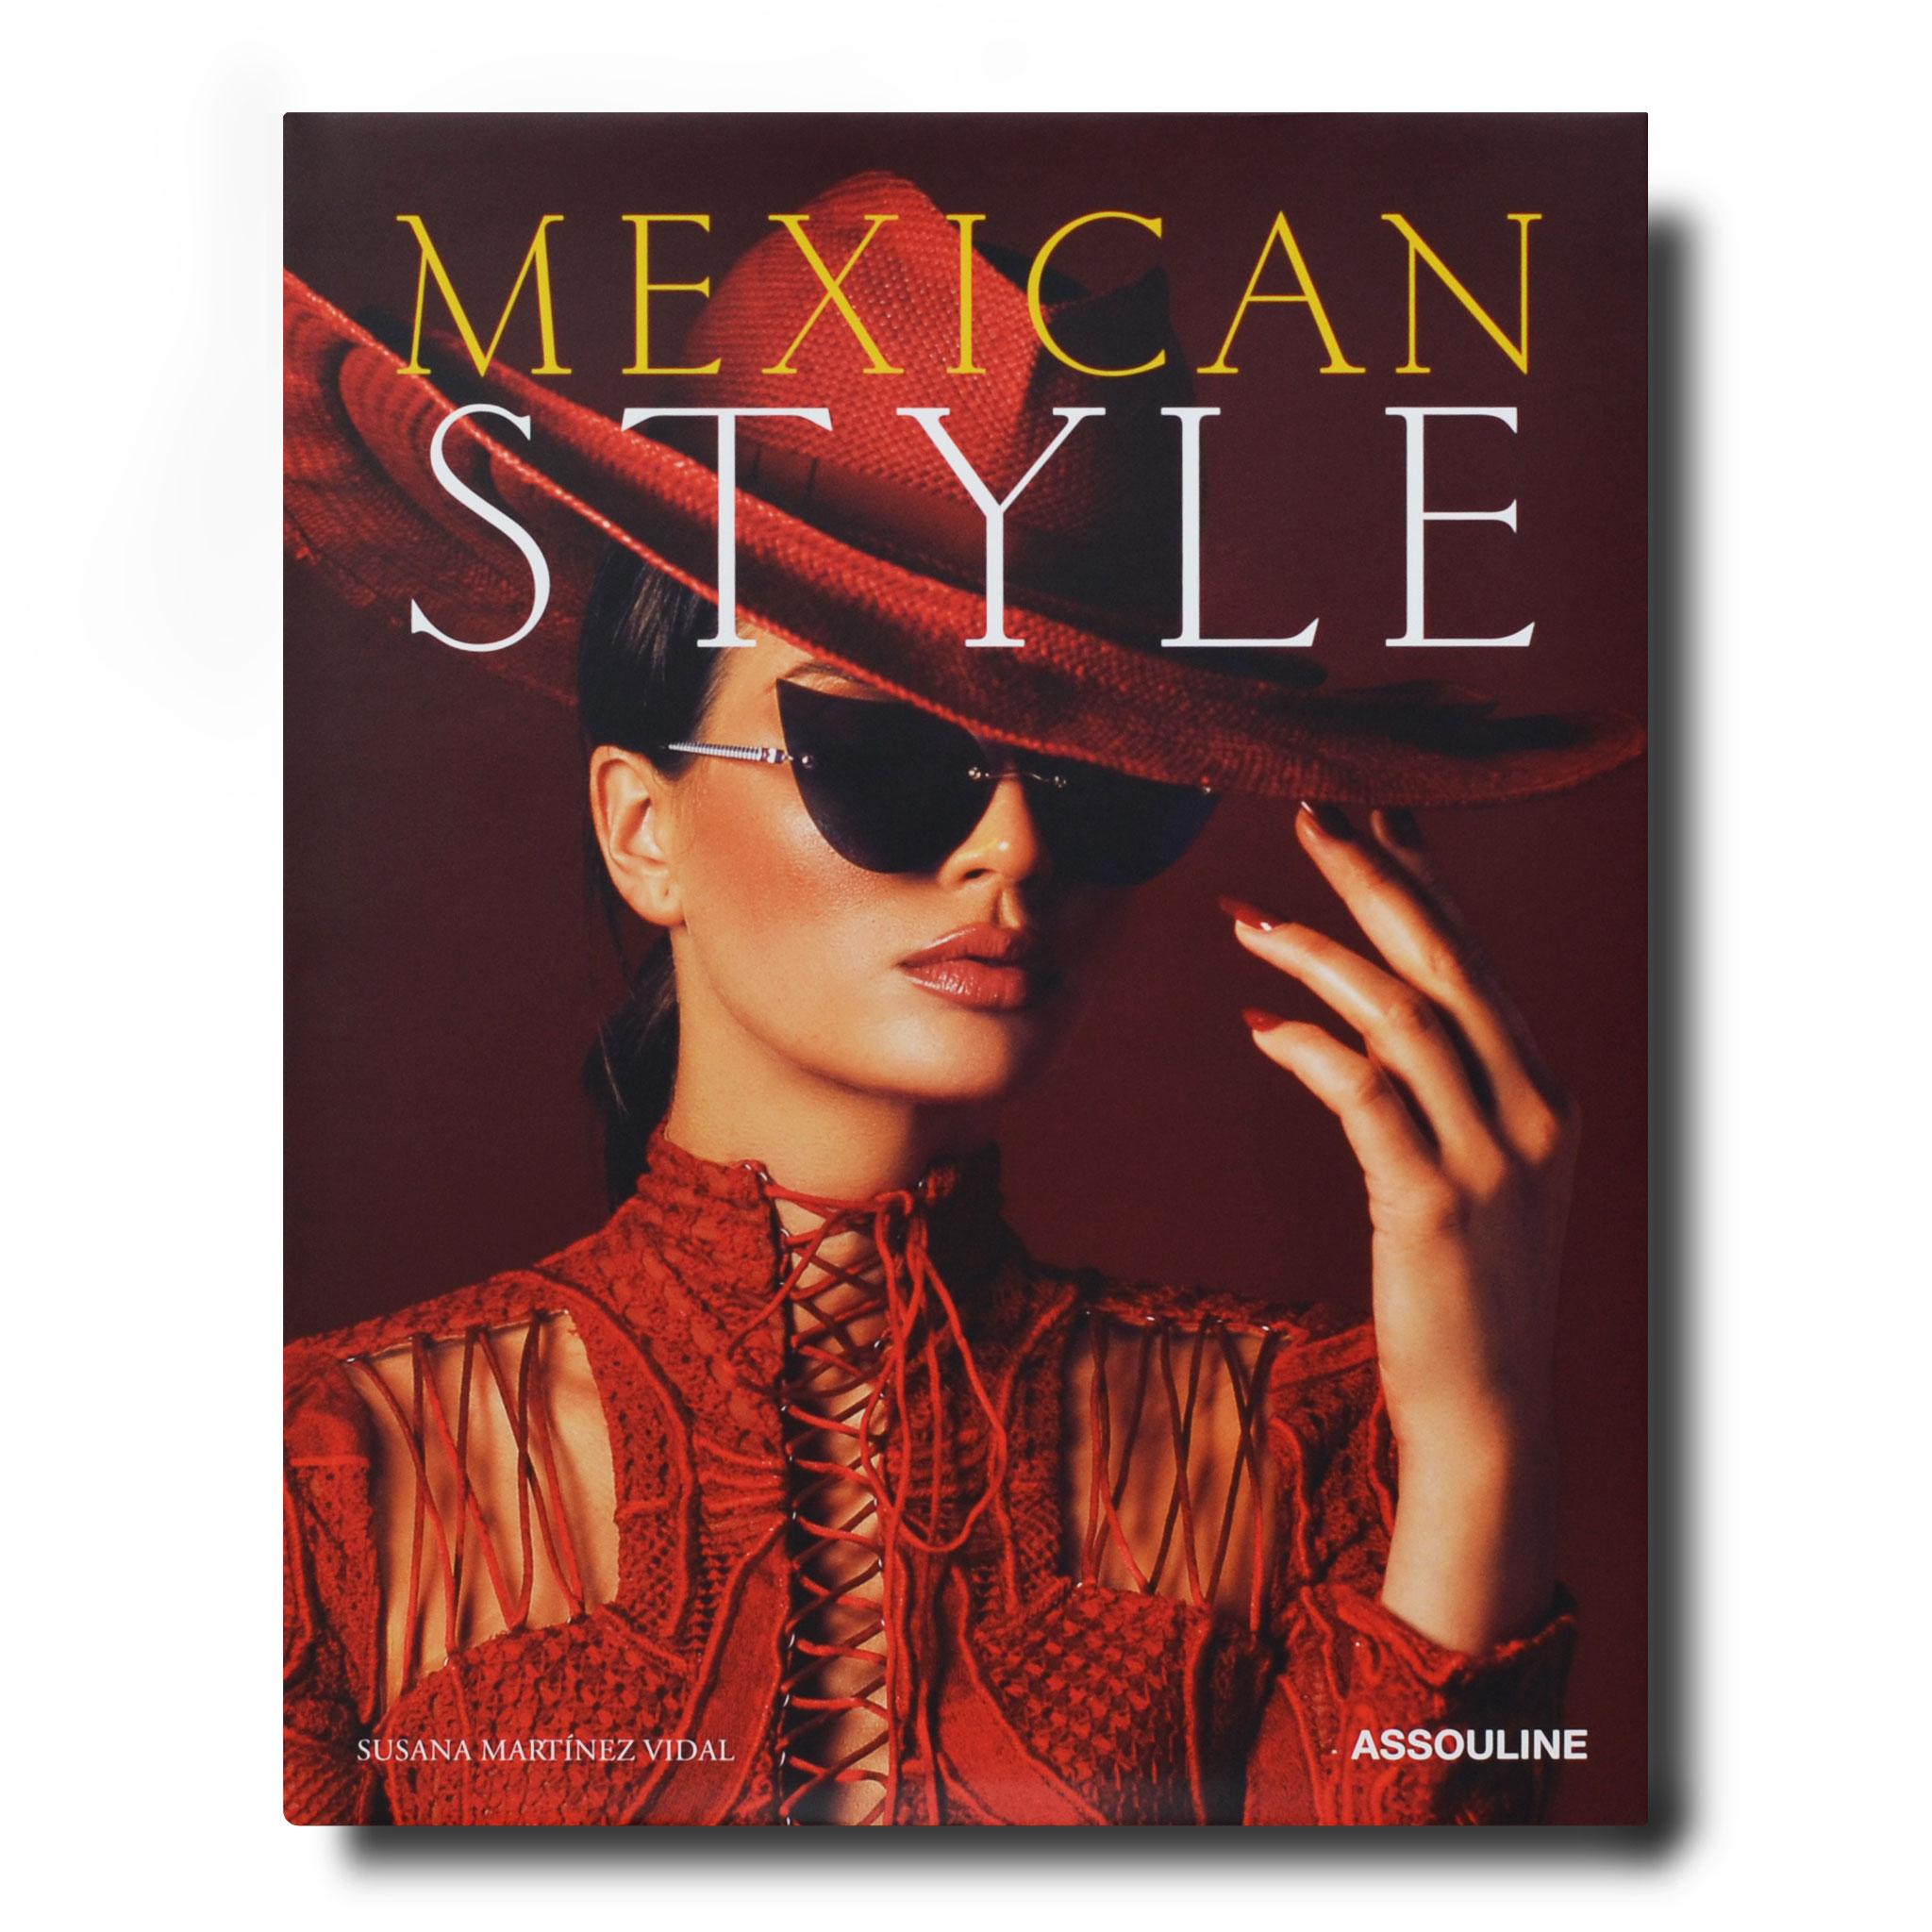 With the most vibrant and original curation of images ever to be assembled and clever descriptions of the concepts that define its soul, Mexican Style is a 360-degree exploration of this mythical and colorful country. A breath of air clears away the